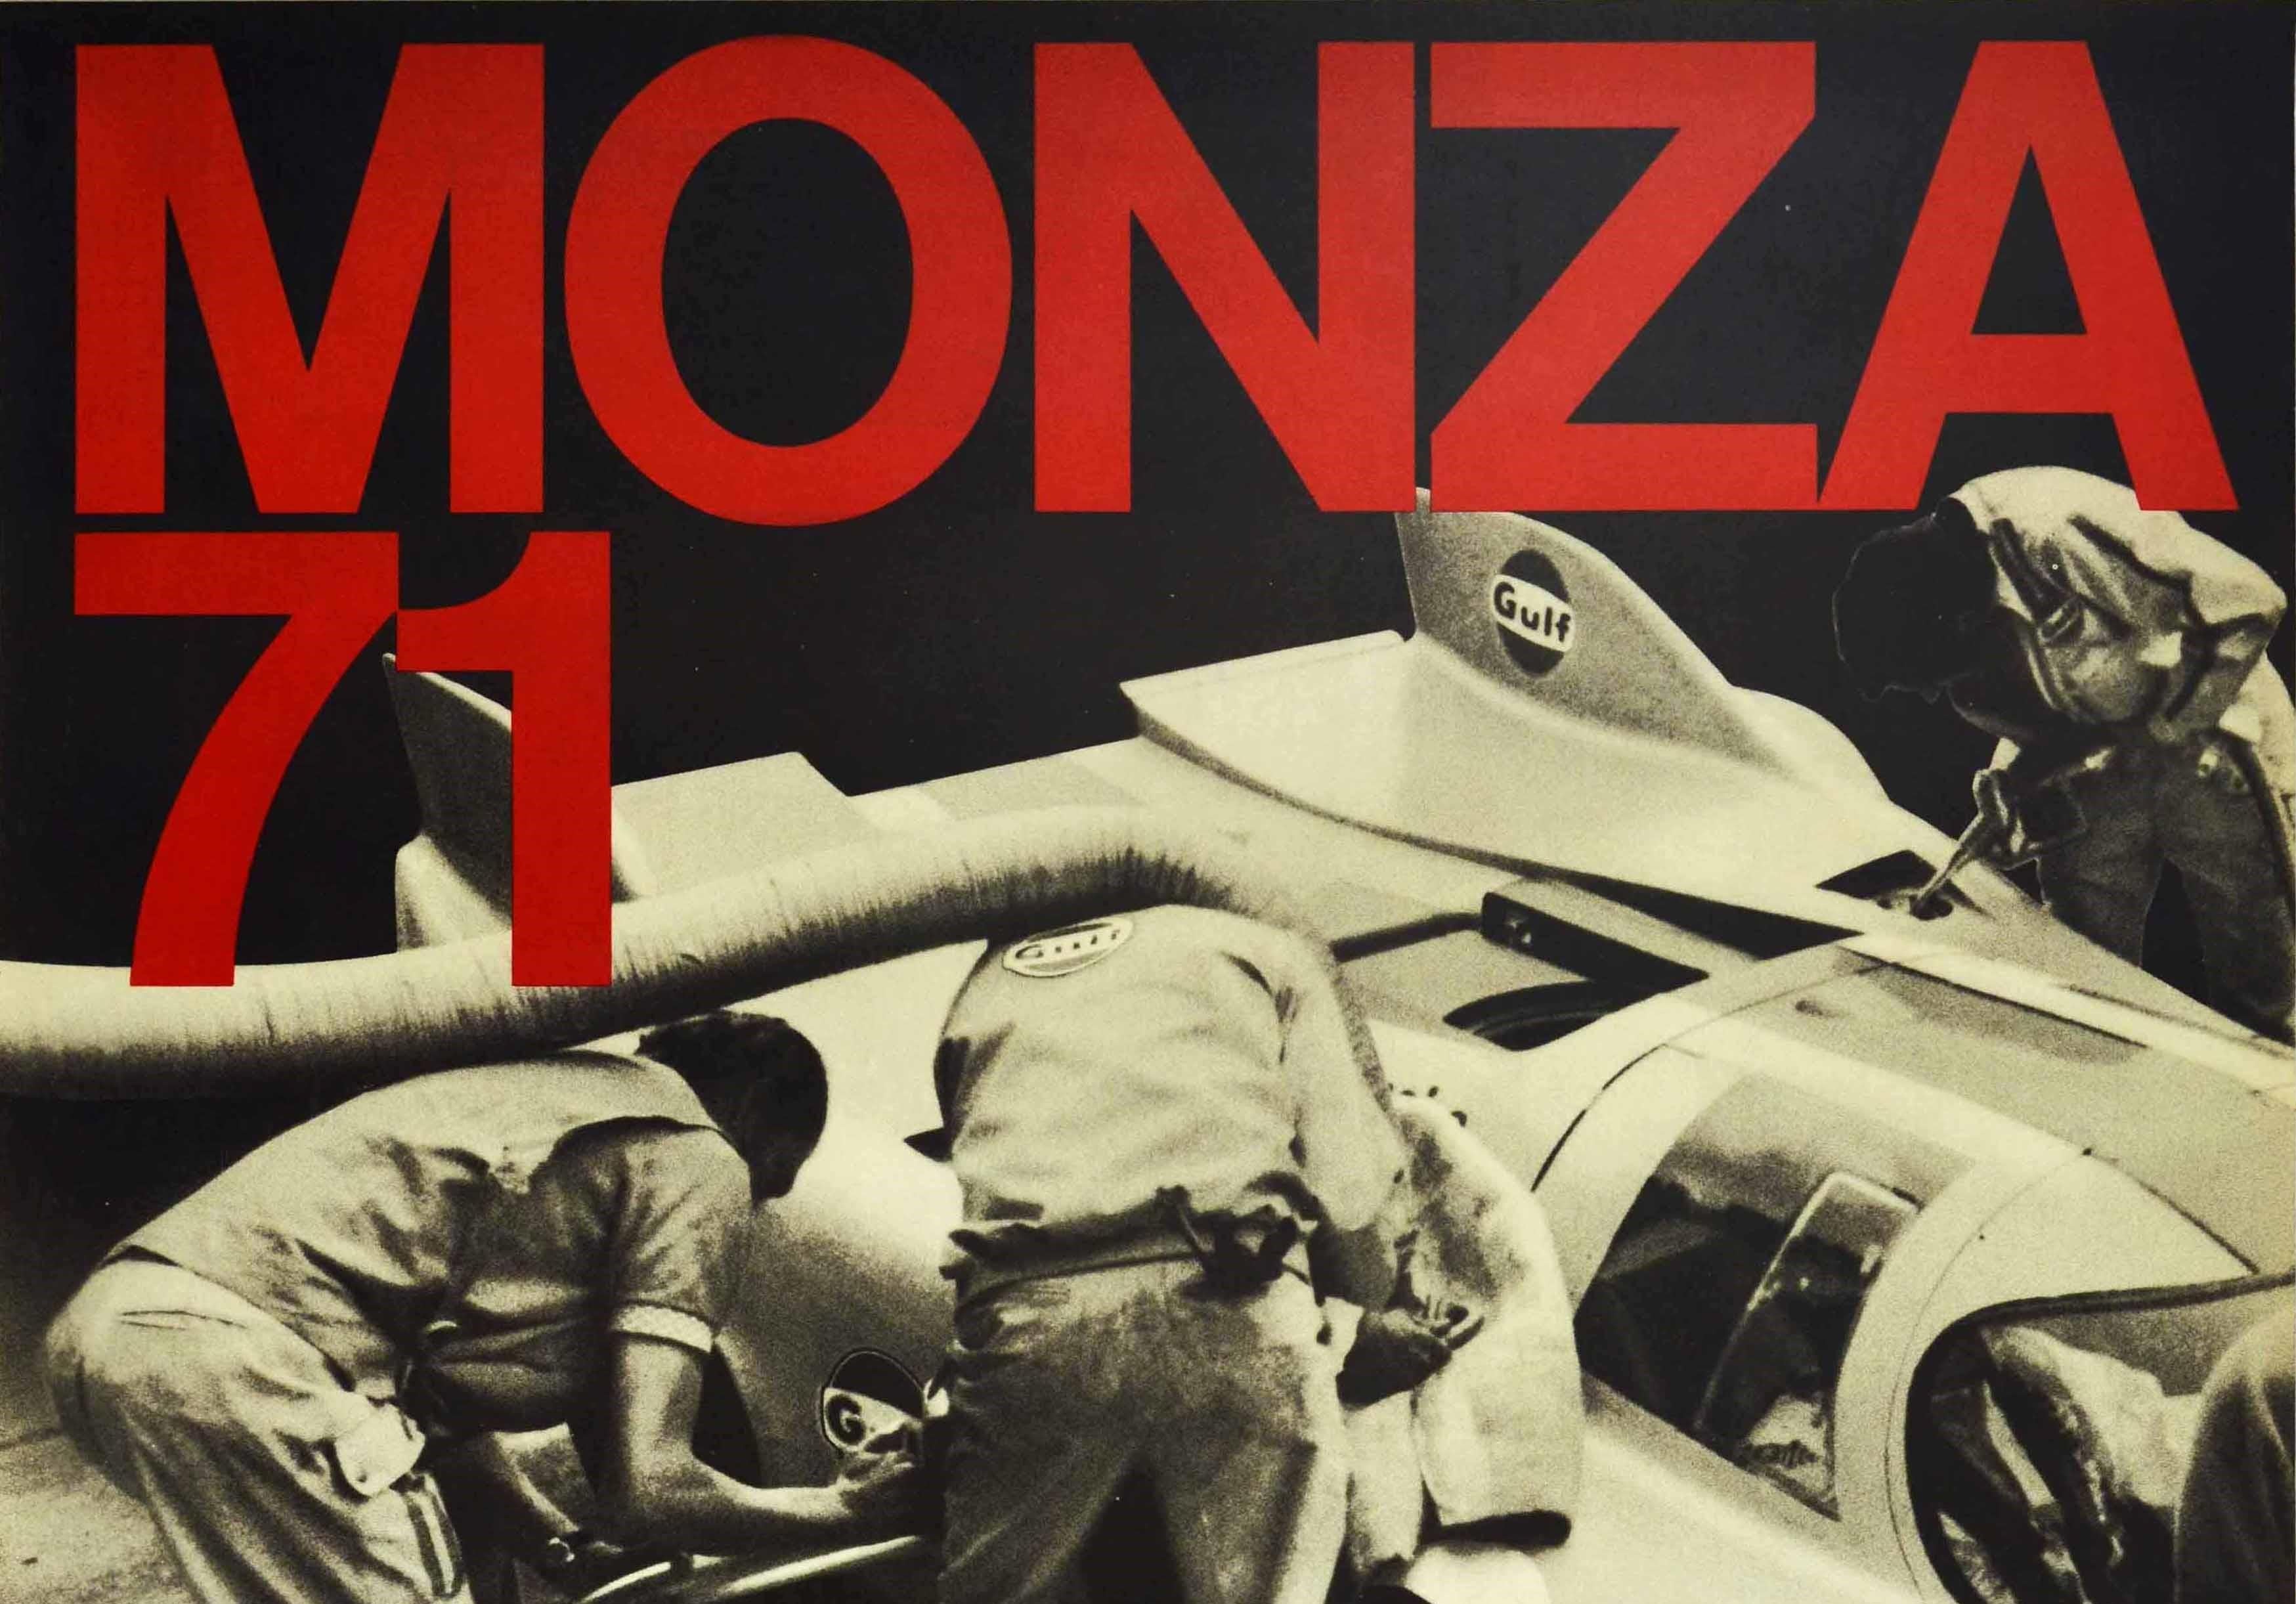 Original vintage motorsport poster celebrating Porsche as the 1000km Monza circuit winner of the Filippo Caracciolo trophy in Italy on 25 April 1971 - Monza 71 1000 Chilometri di Monza Italia Trofeo Filippo Caracciolo - featuring a black and white